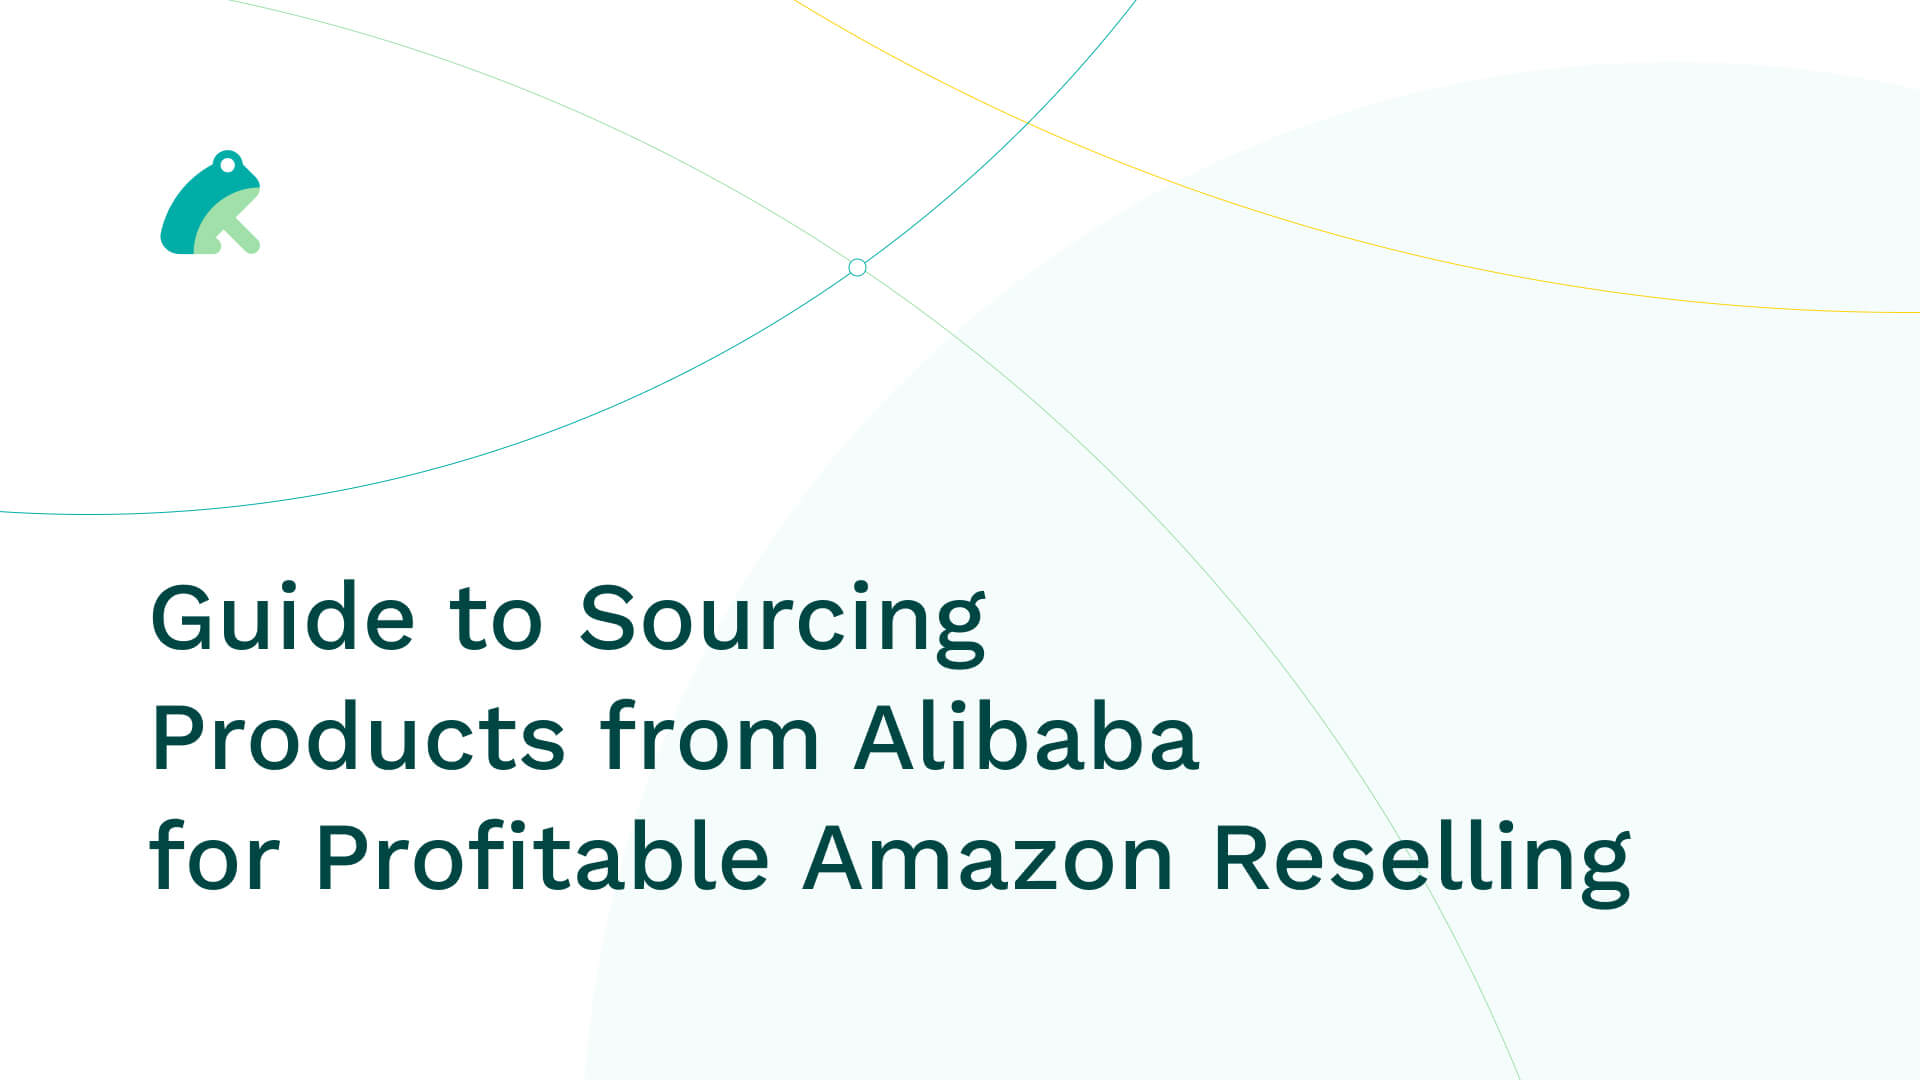 Guide to Sourcing Products from Alibaba for Profitable Amazon Reselling